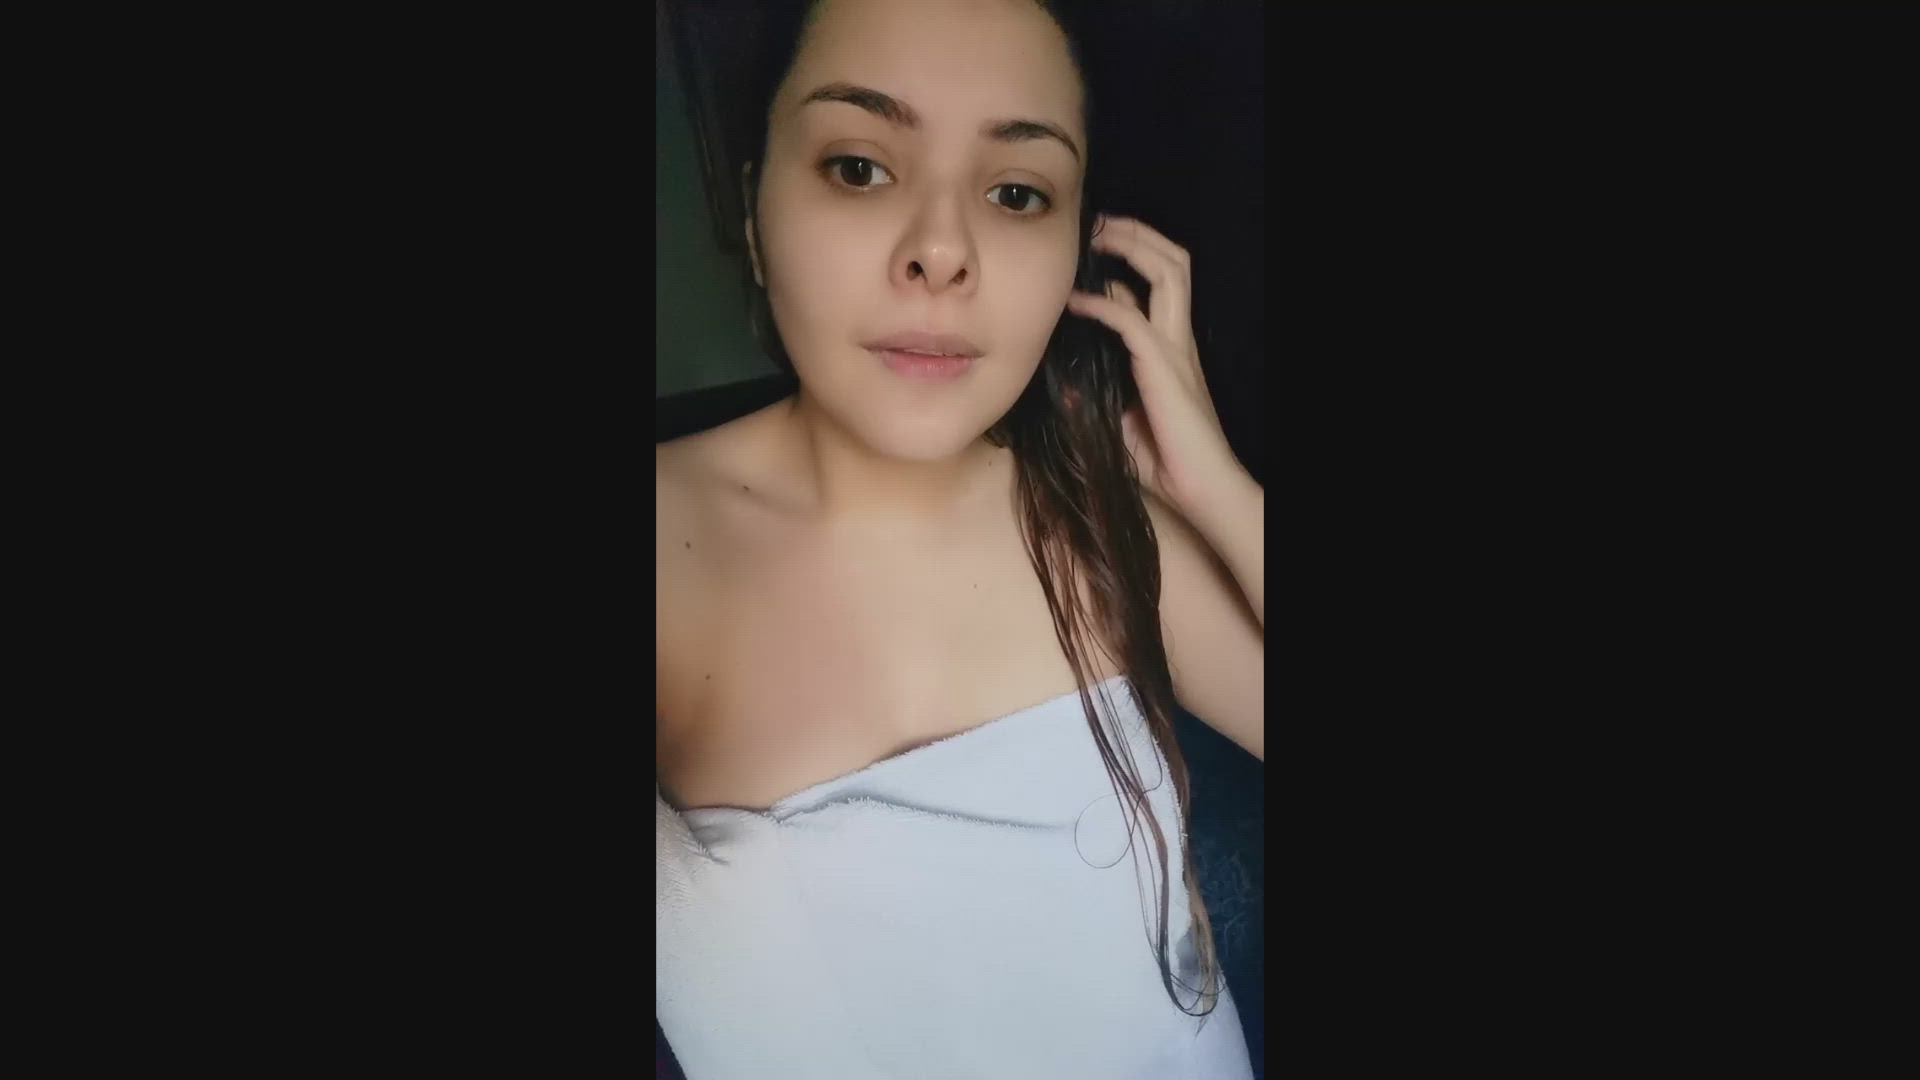 Homemade porn video with onlyfans model gretasounders <strong>@gretasounders</strong>